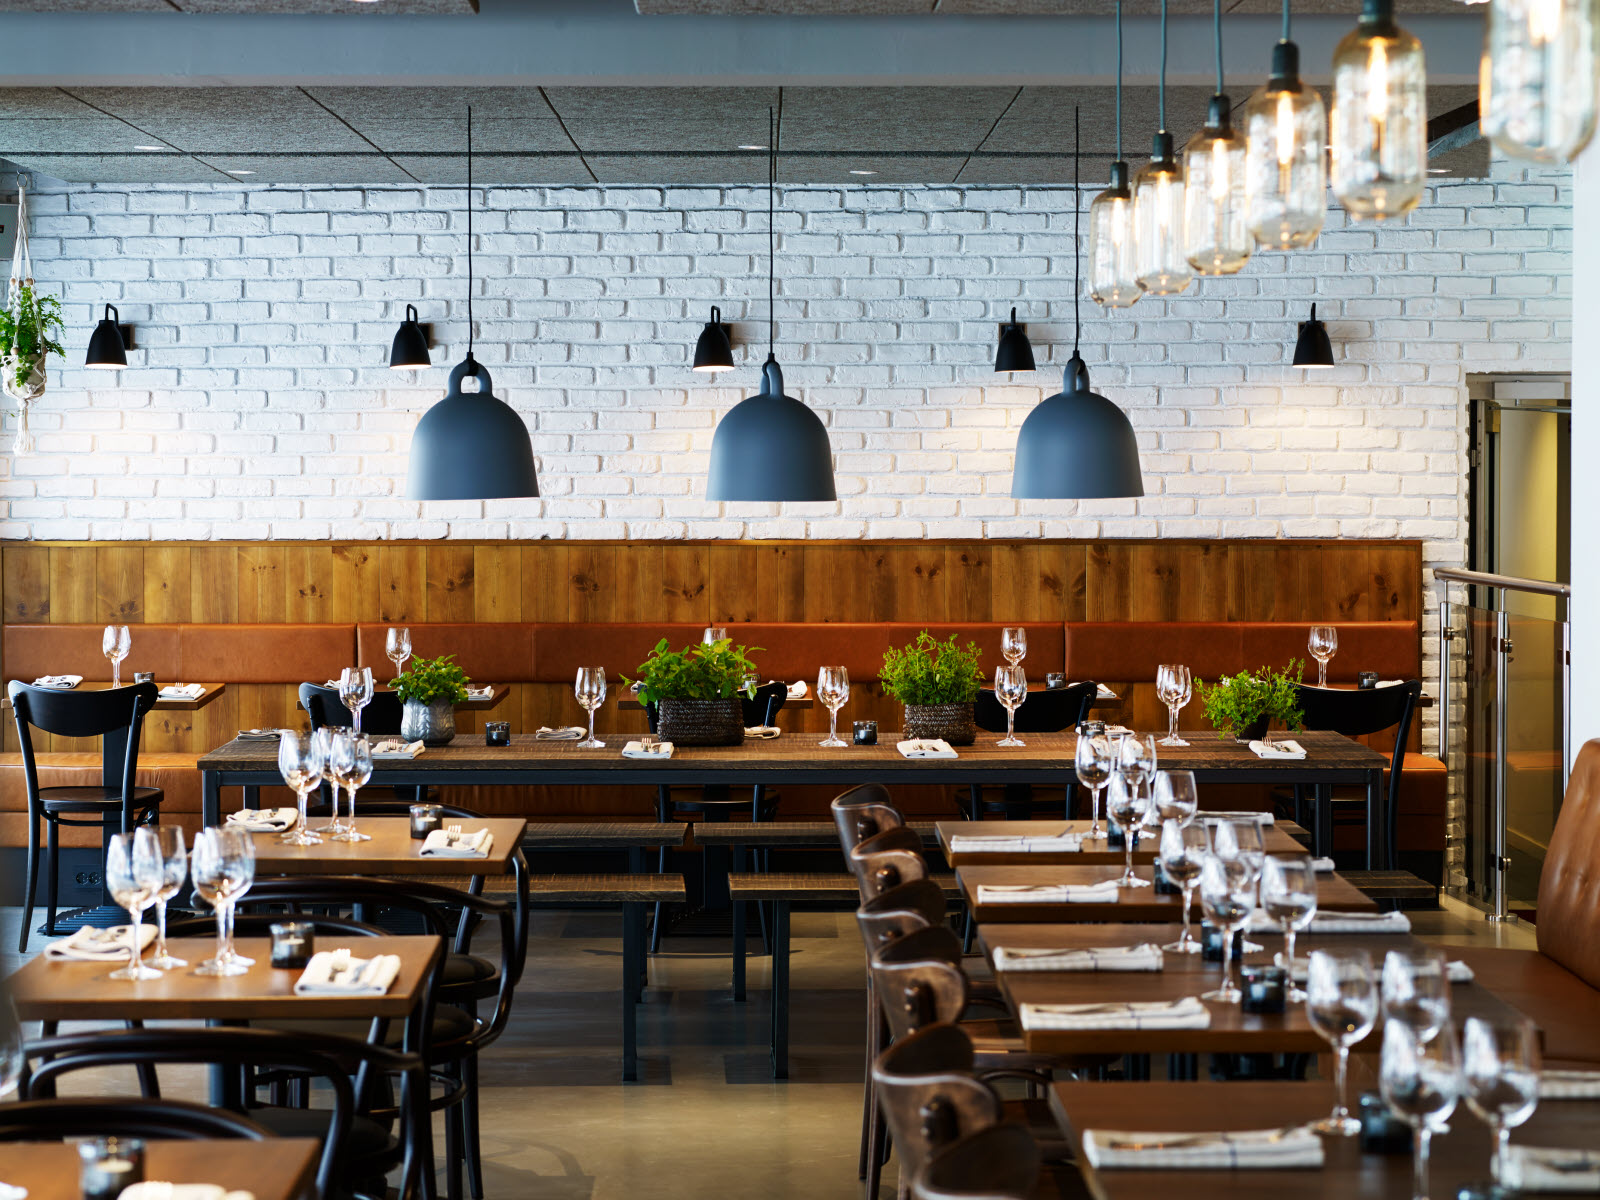 6 Important Questions to Ask When Selecting a New Restaurant | Real ...